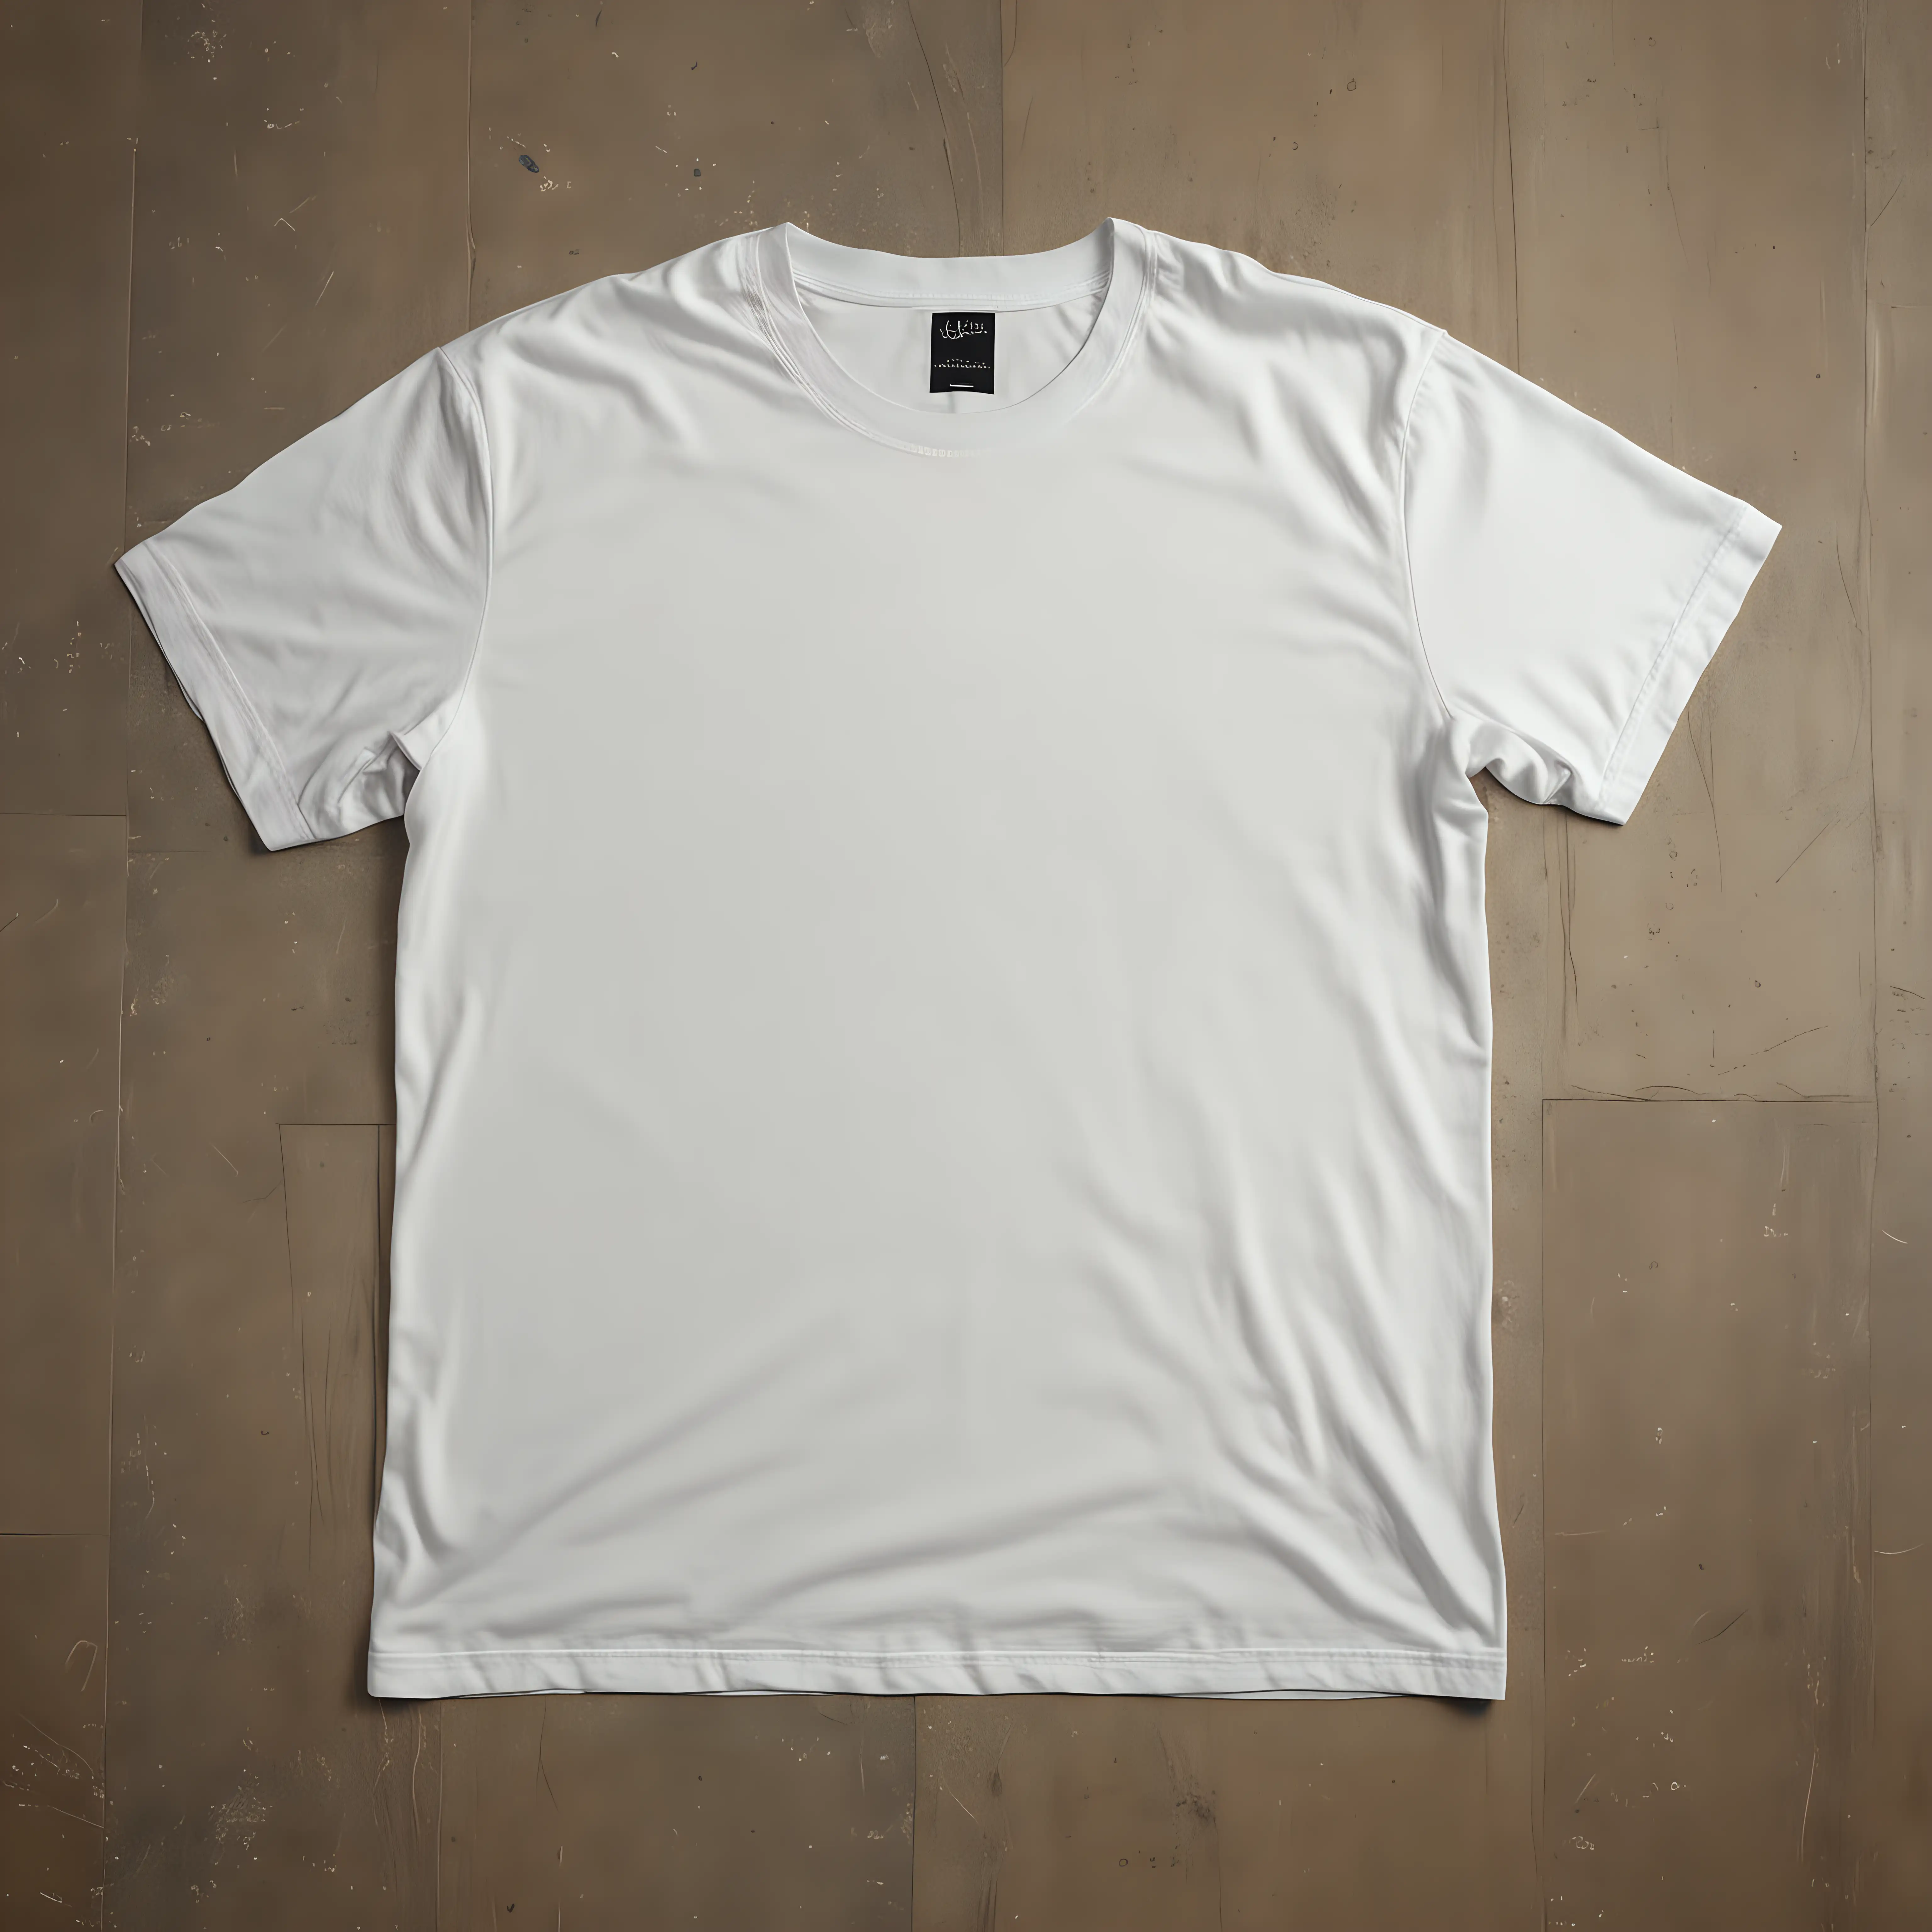 White TShirt on Floor with Solid Background